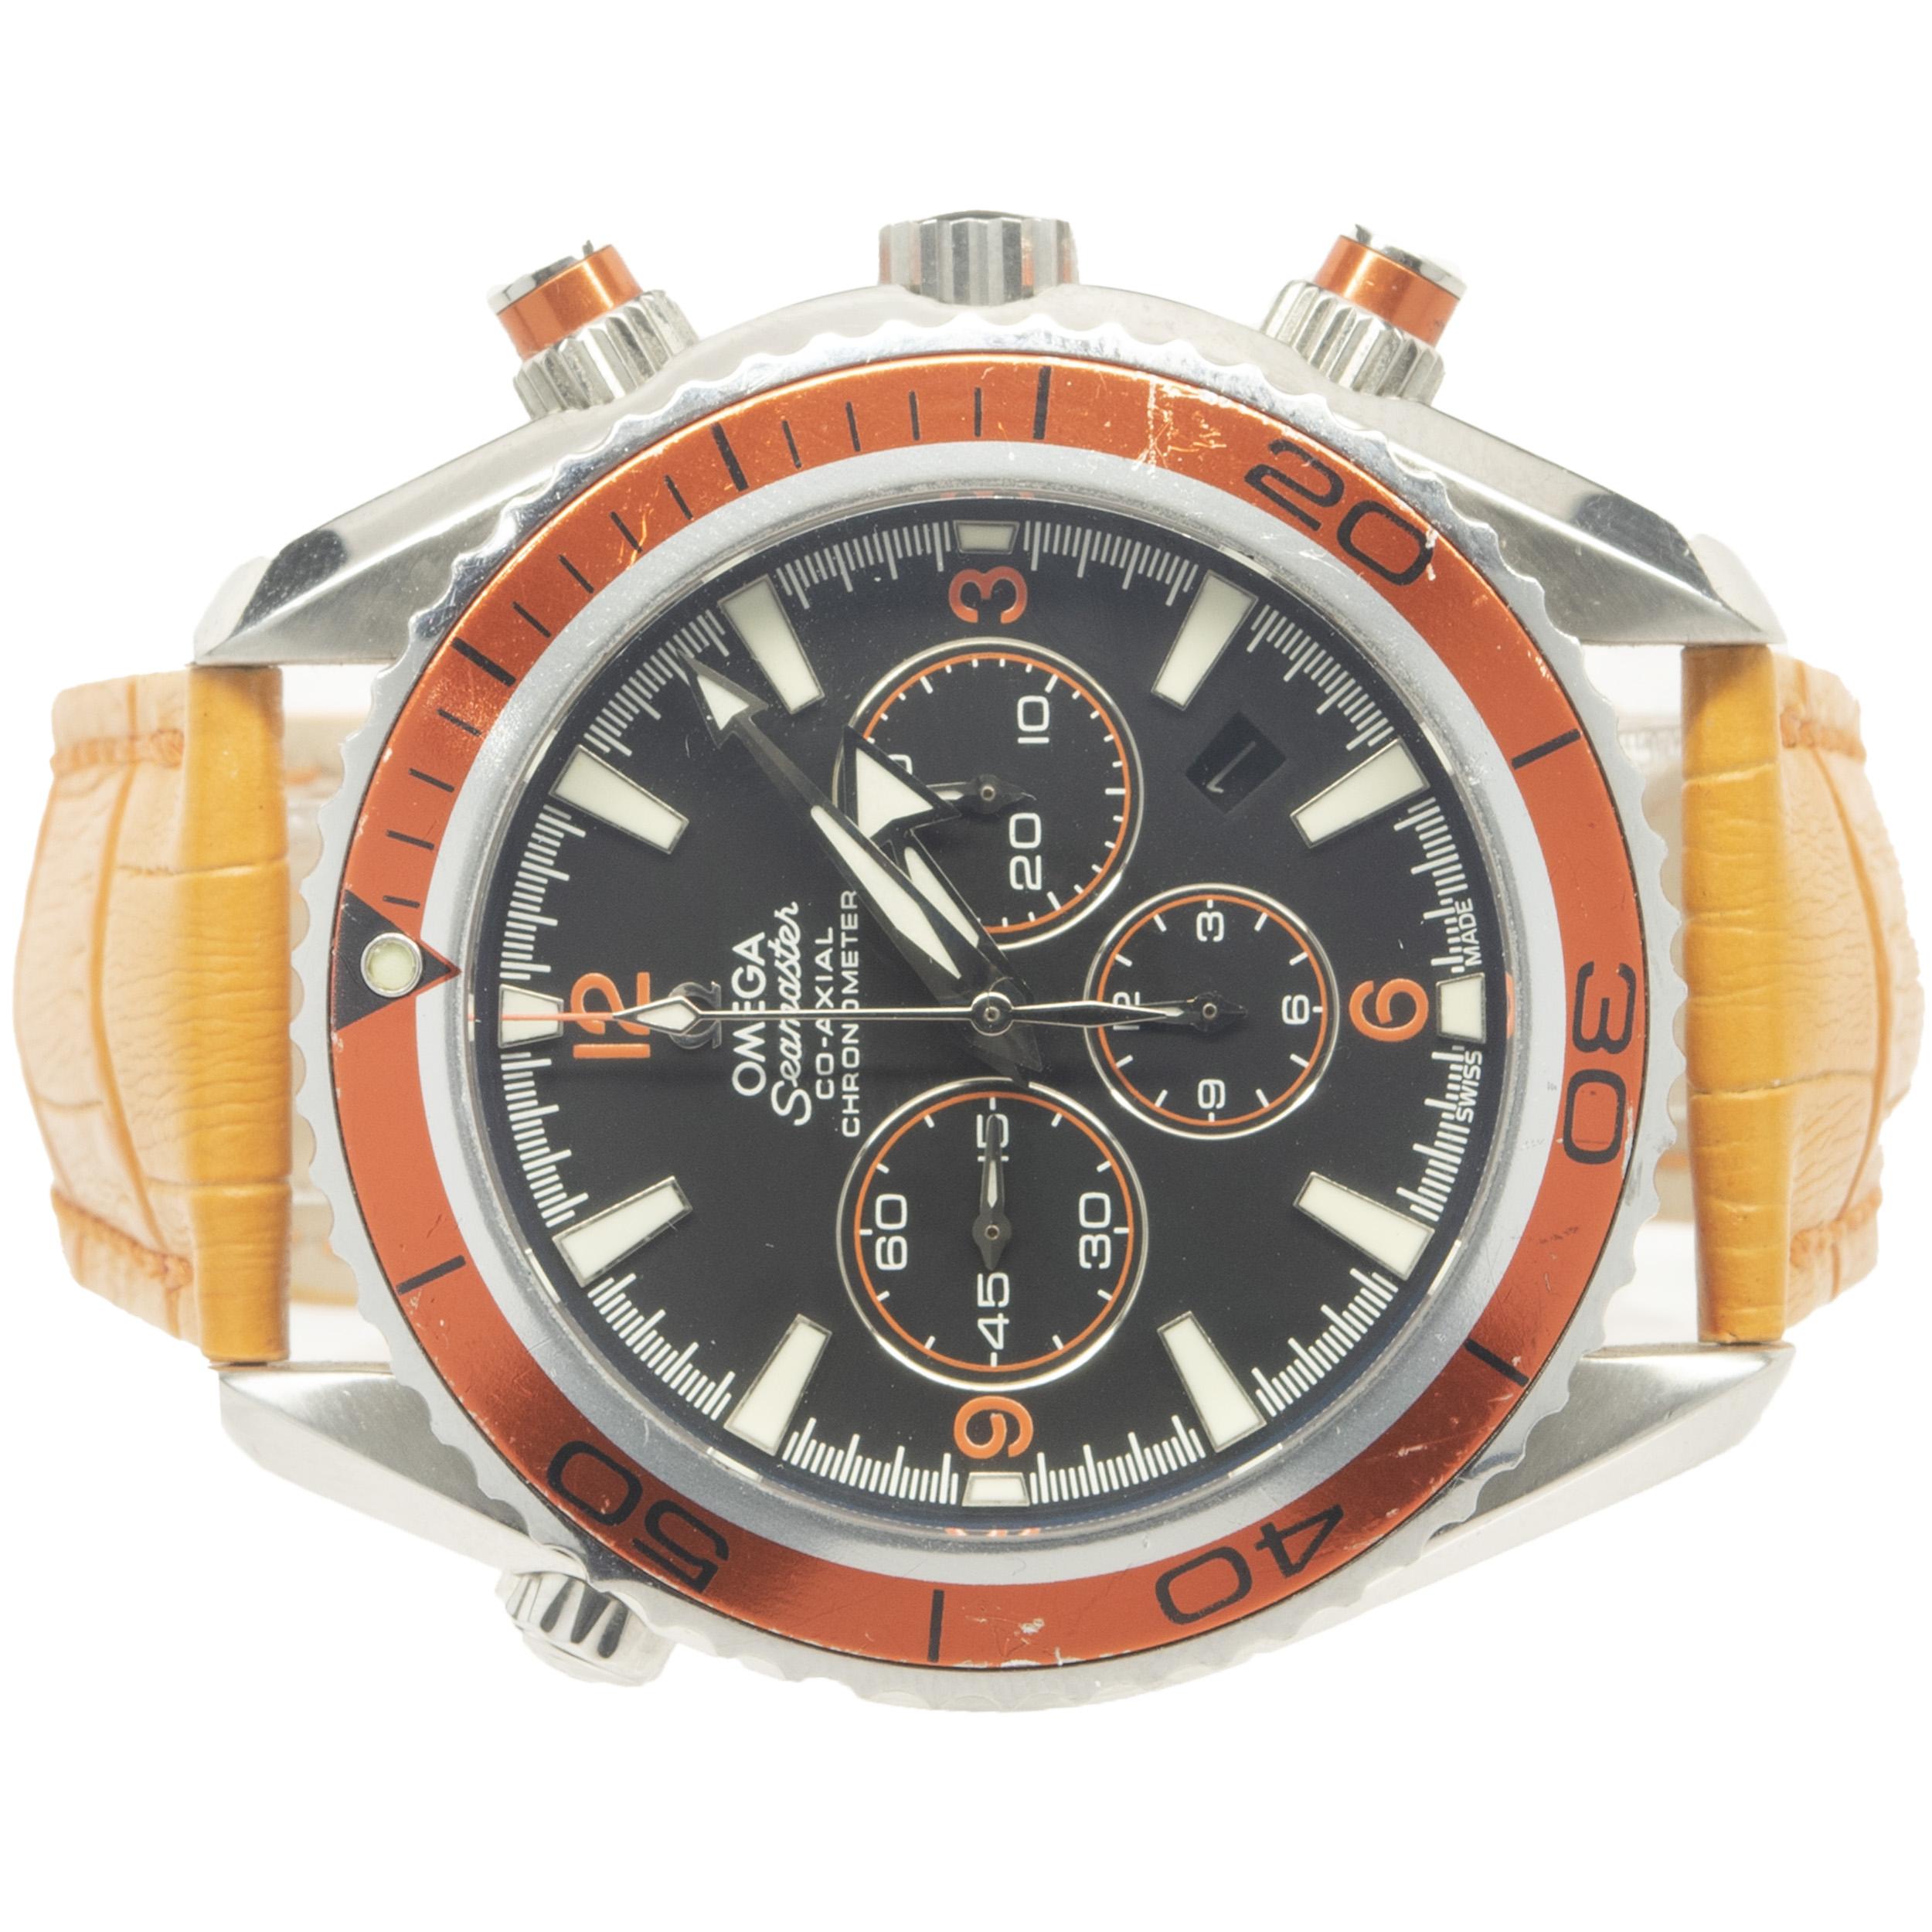 Brand: Omega
Movement: automatic
Function: hours, minutes, seconds, date, chronometer, helium escape valve
Case: 42mm round case, orange timing bezel, push/pull crown
Band: orange Omega leather strap, deployment clasp
Dial: black